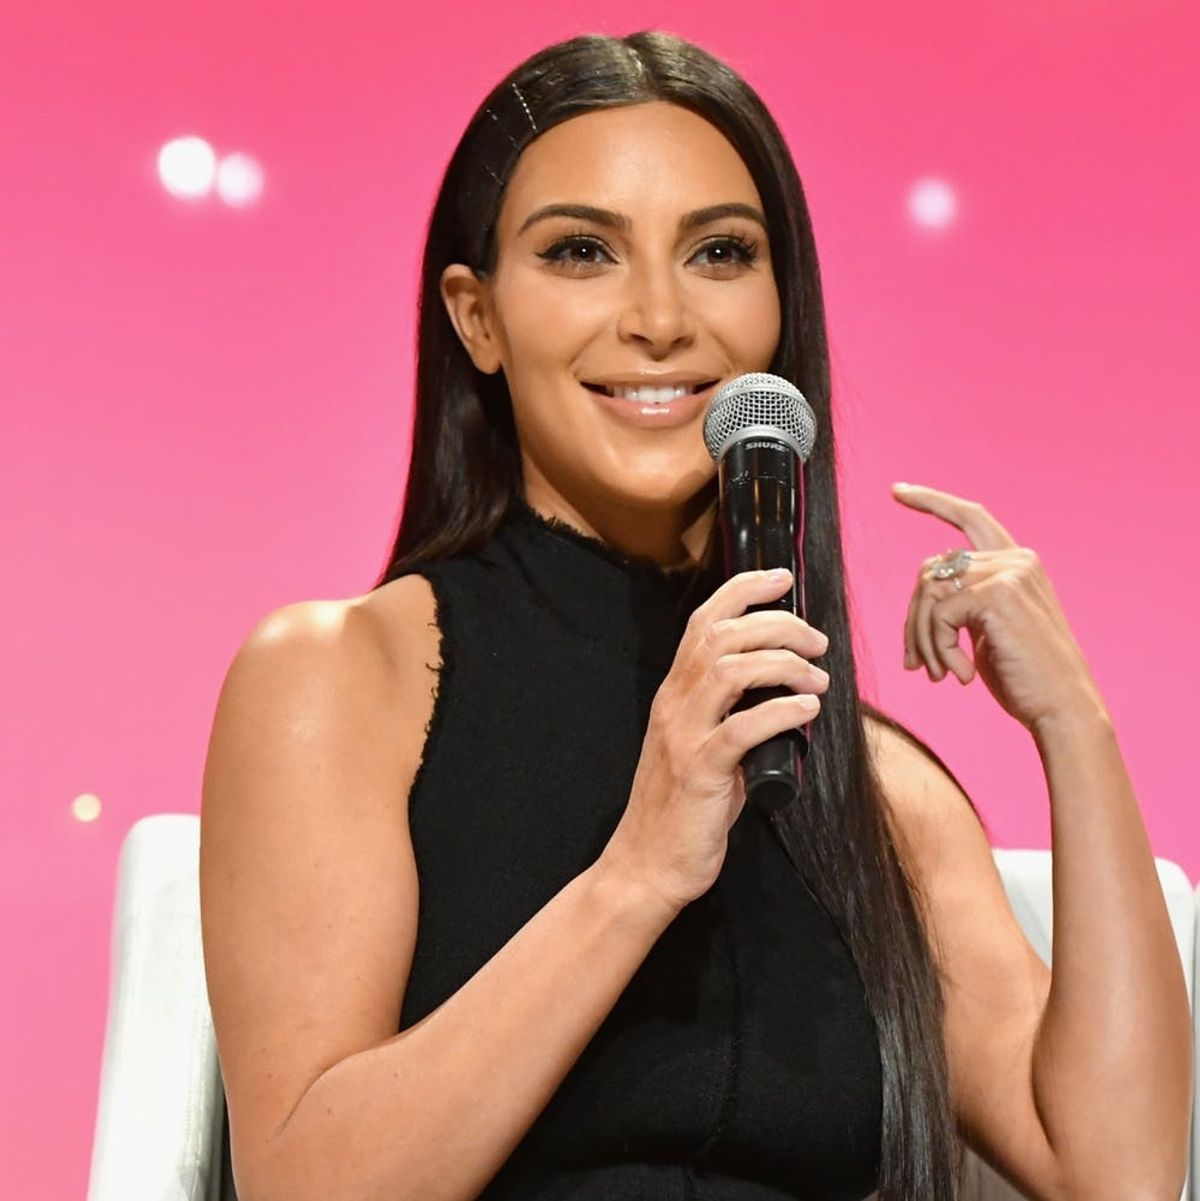 If You Made Fun of Kim Kardashian’s Robbery, You’re a Bad Person